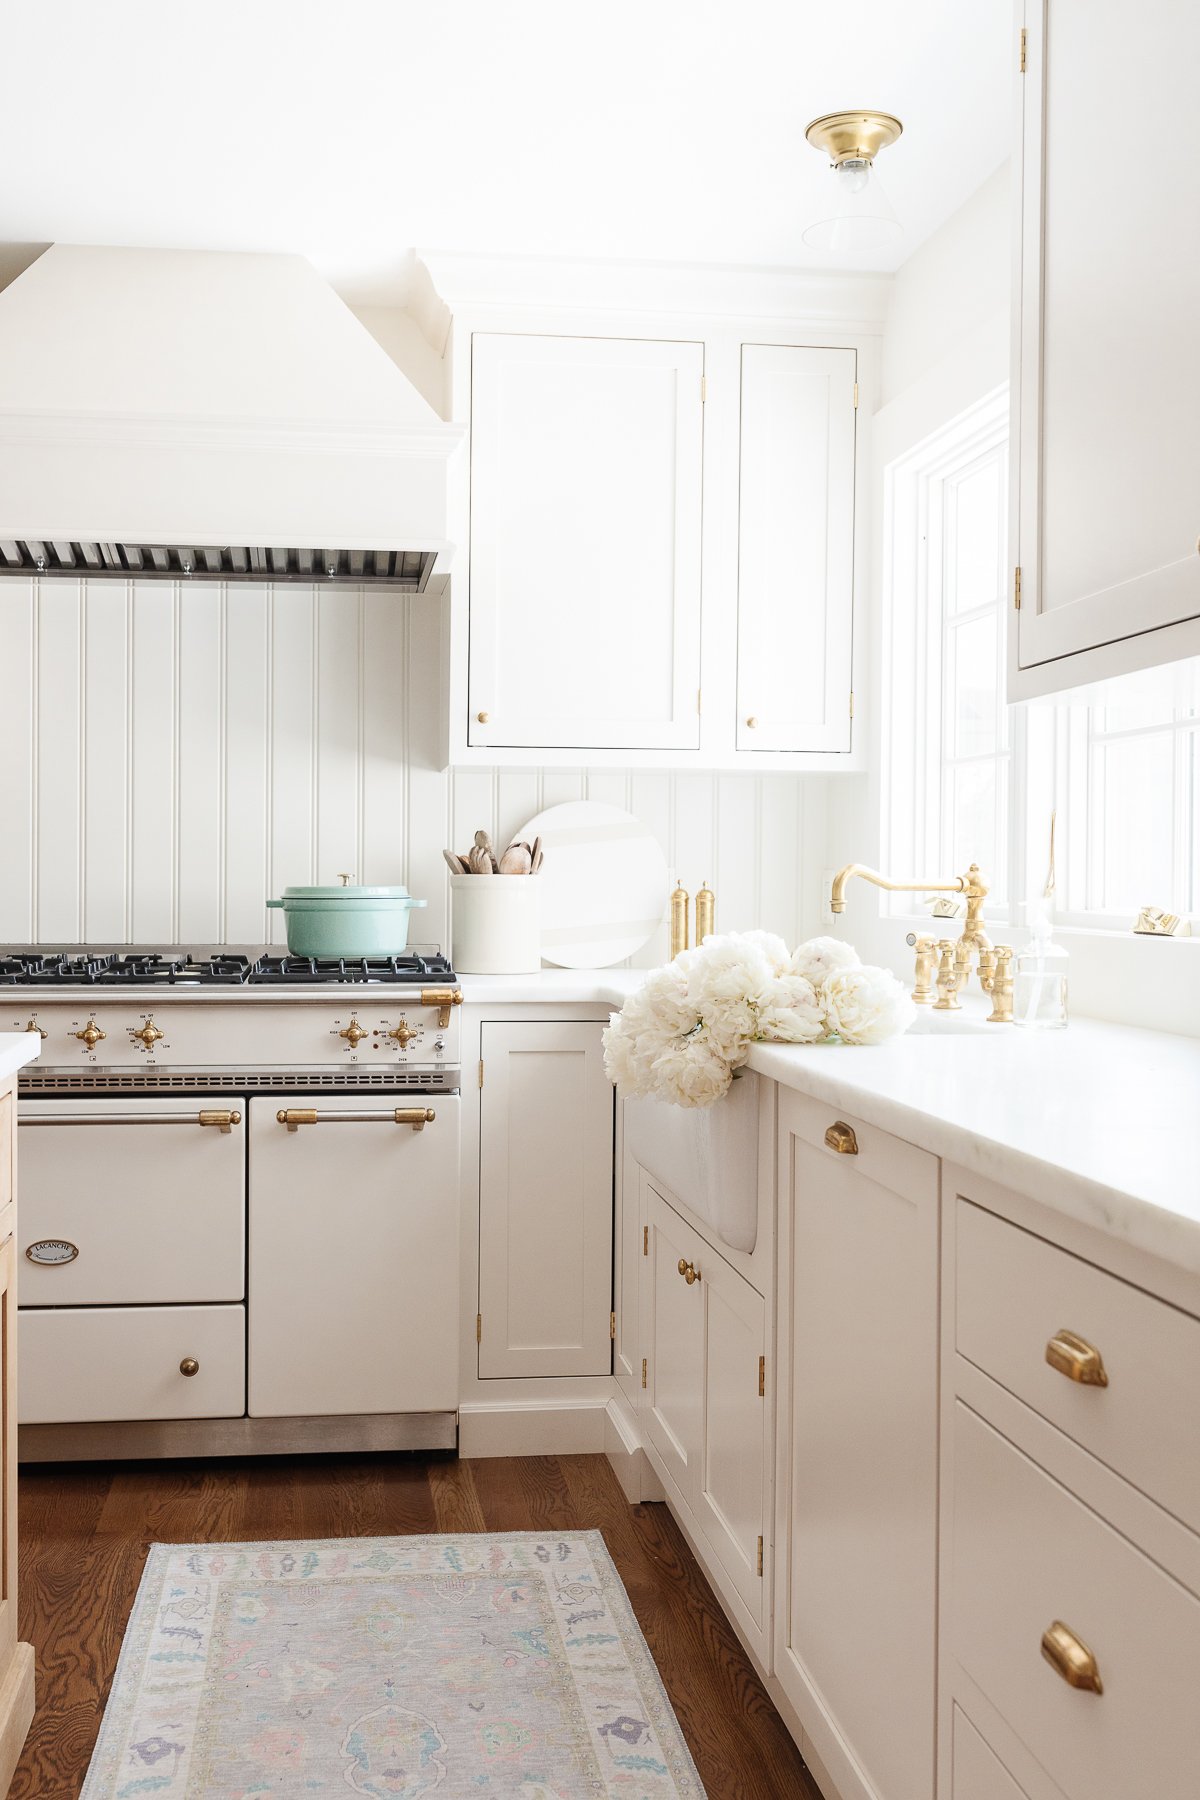 A white kitchen with a rug on the floor